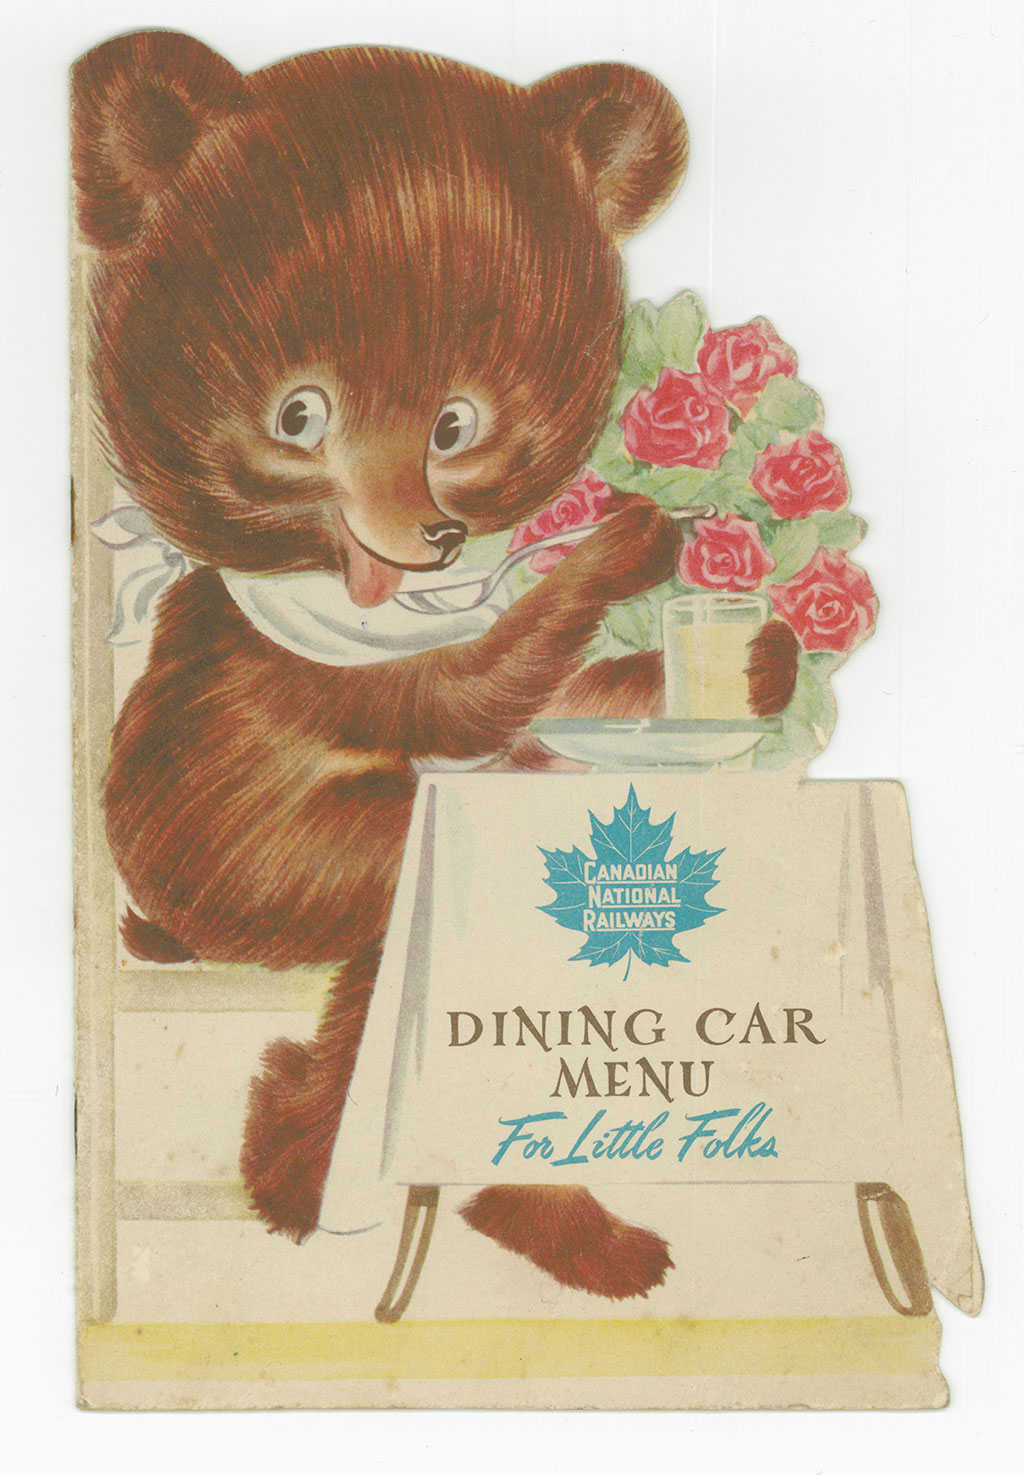 Front cover of an old-fashioned train’s menu, showing a cartoon bear with a bib seated at a table.